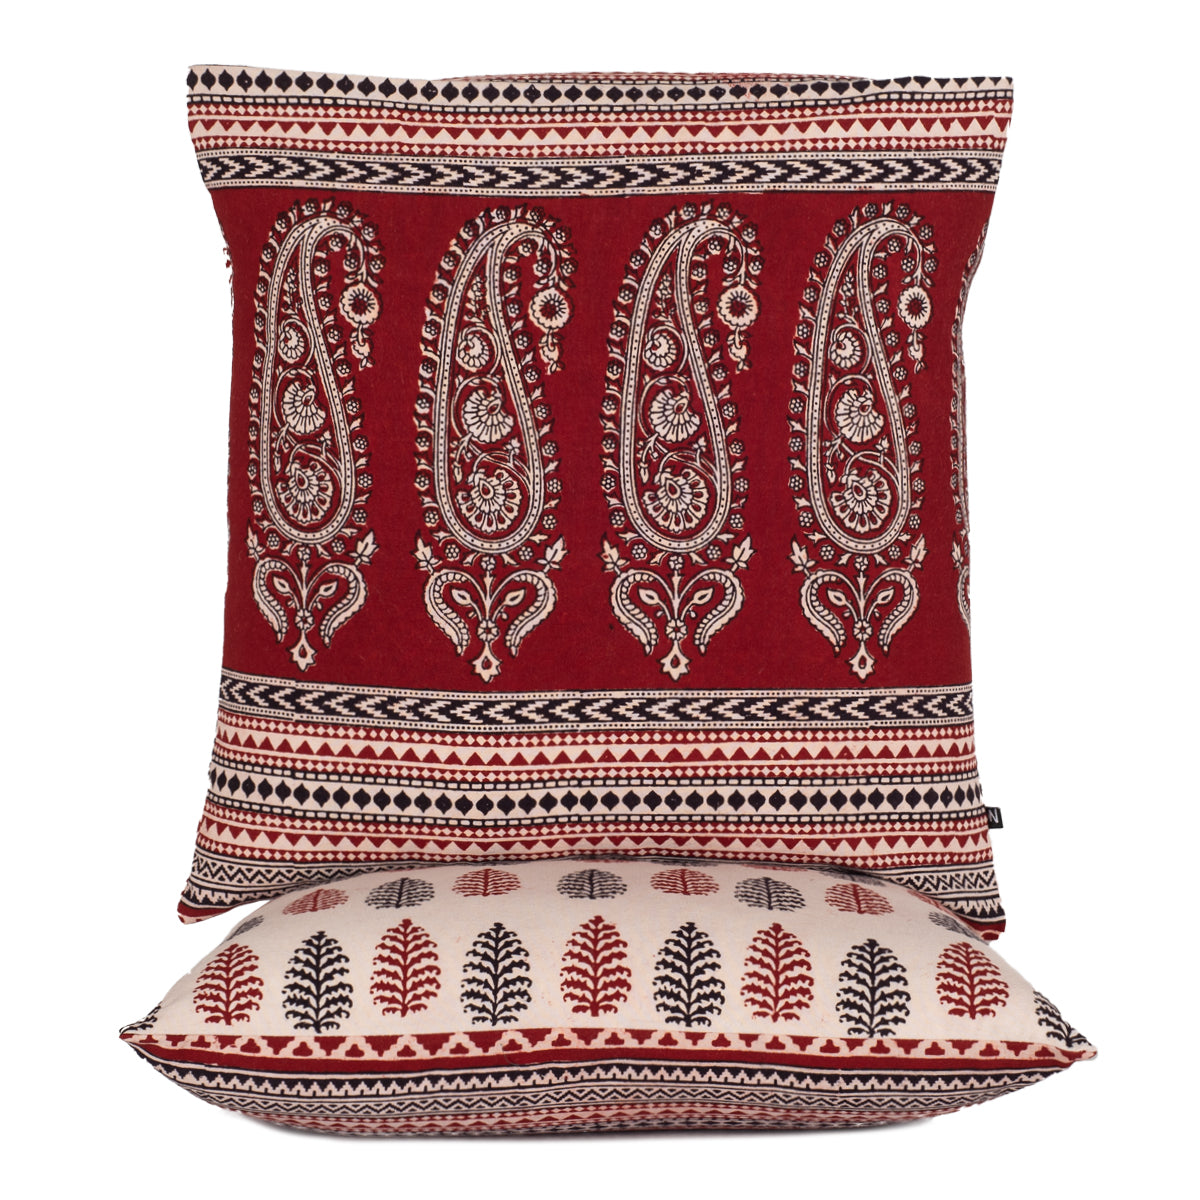 Paisley and Pine Bagh Hand Block Print Cotton Cushion Cover - Red Black-1